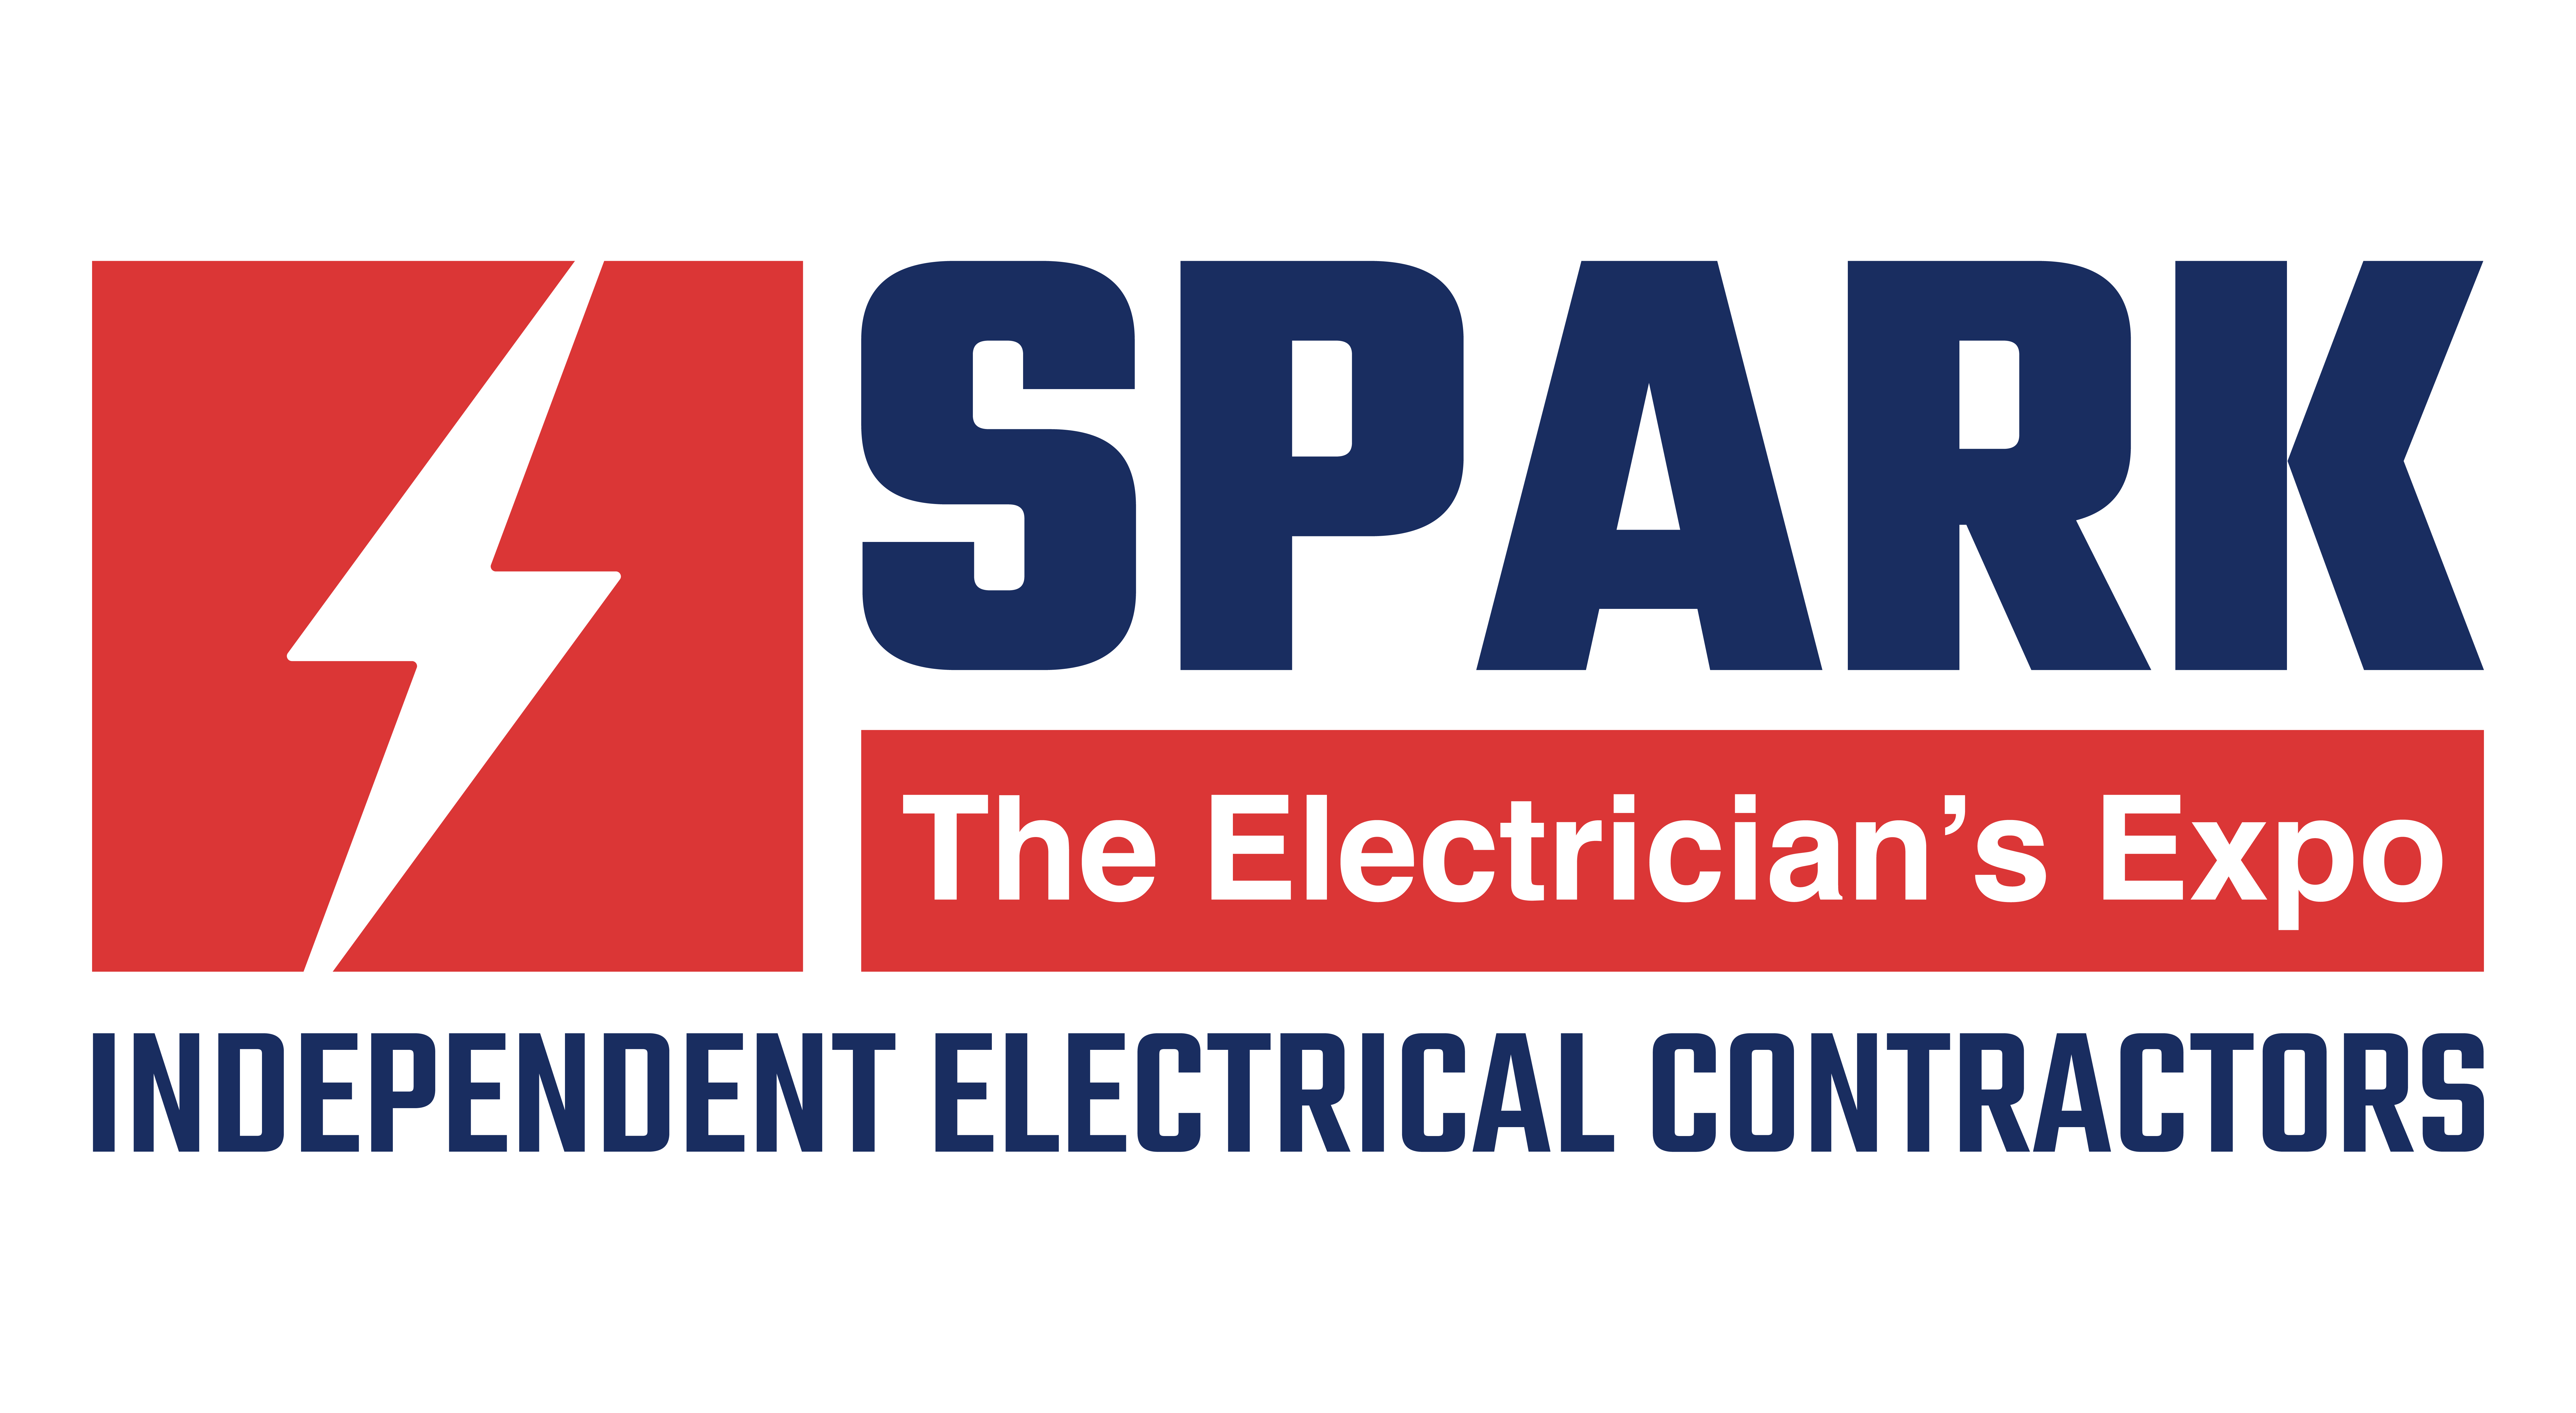 IEC SPARK The Electricians Expo